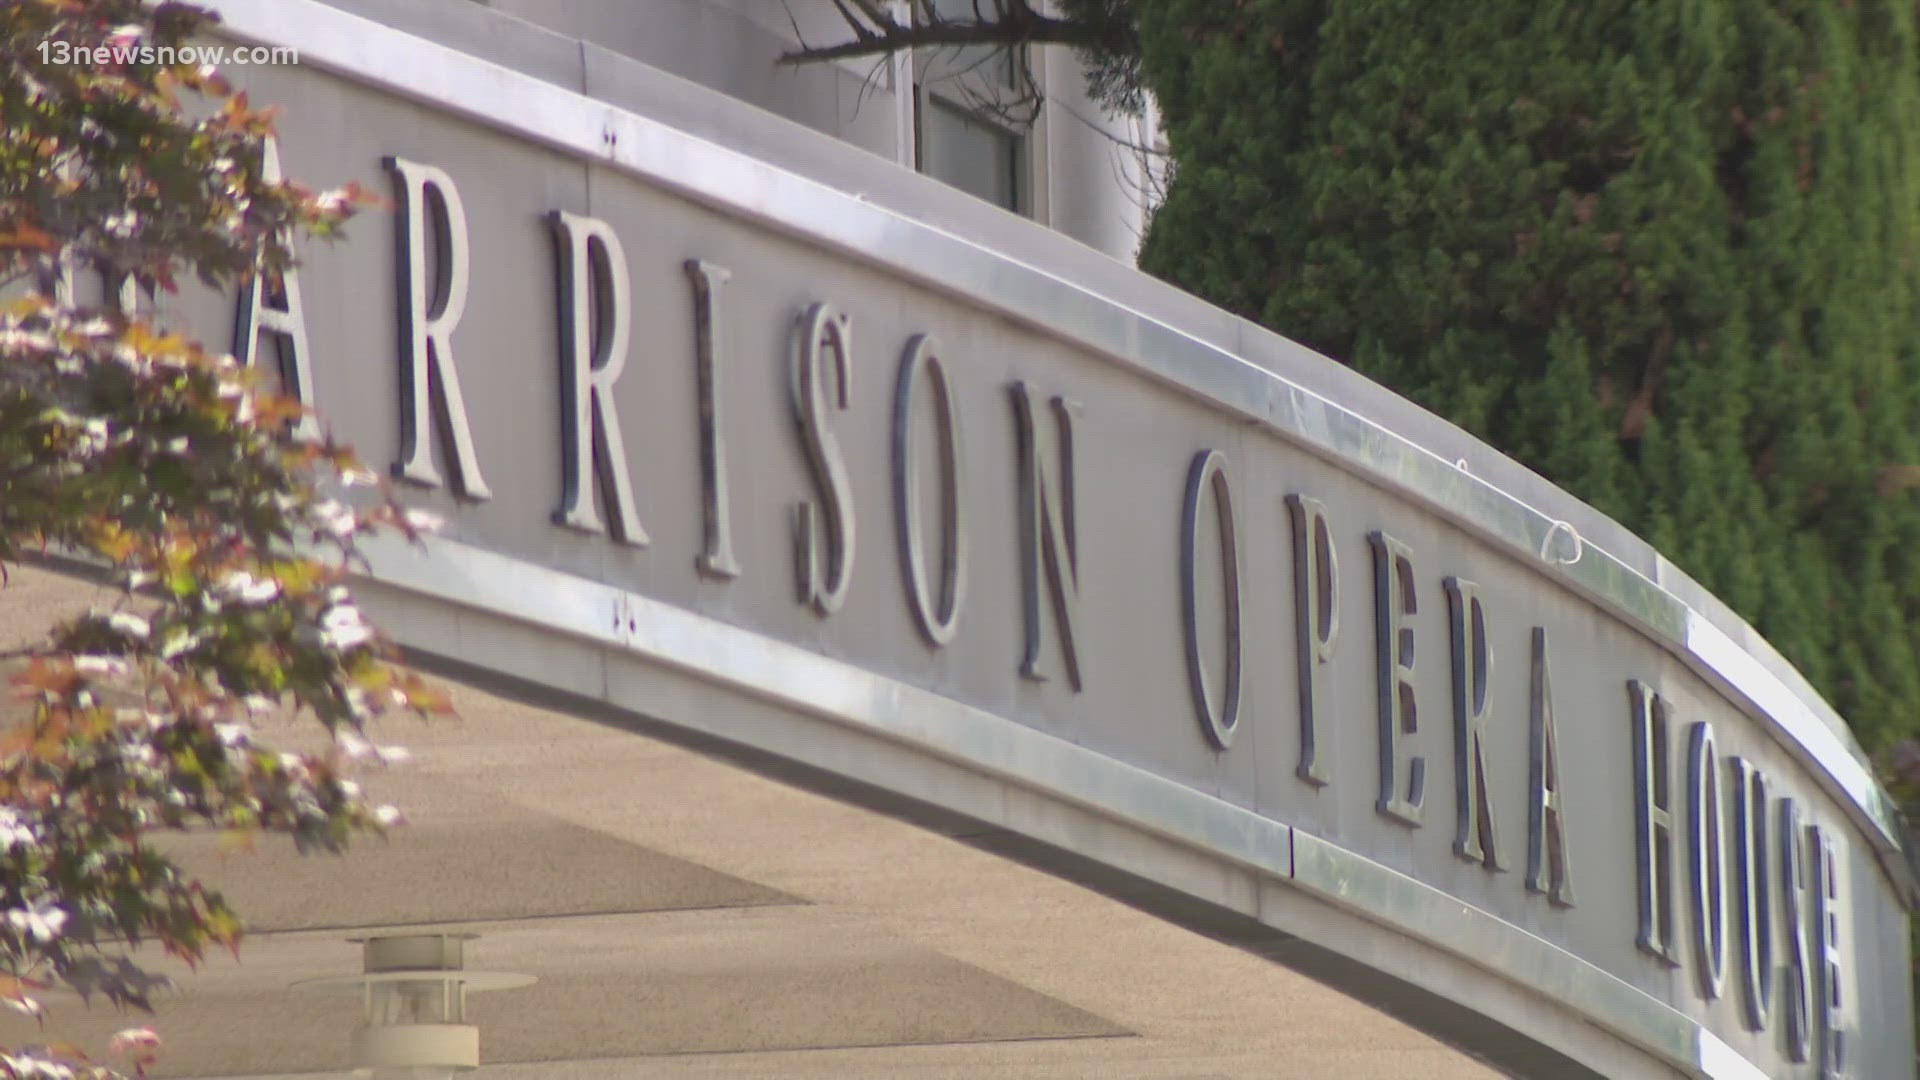 The City of Norfolk claims the Virginia Opera owes over a quarter-million dollars in unpaid rent.